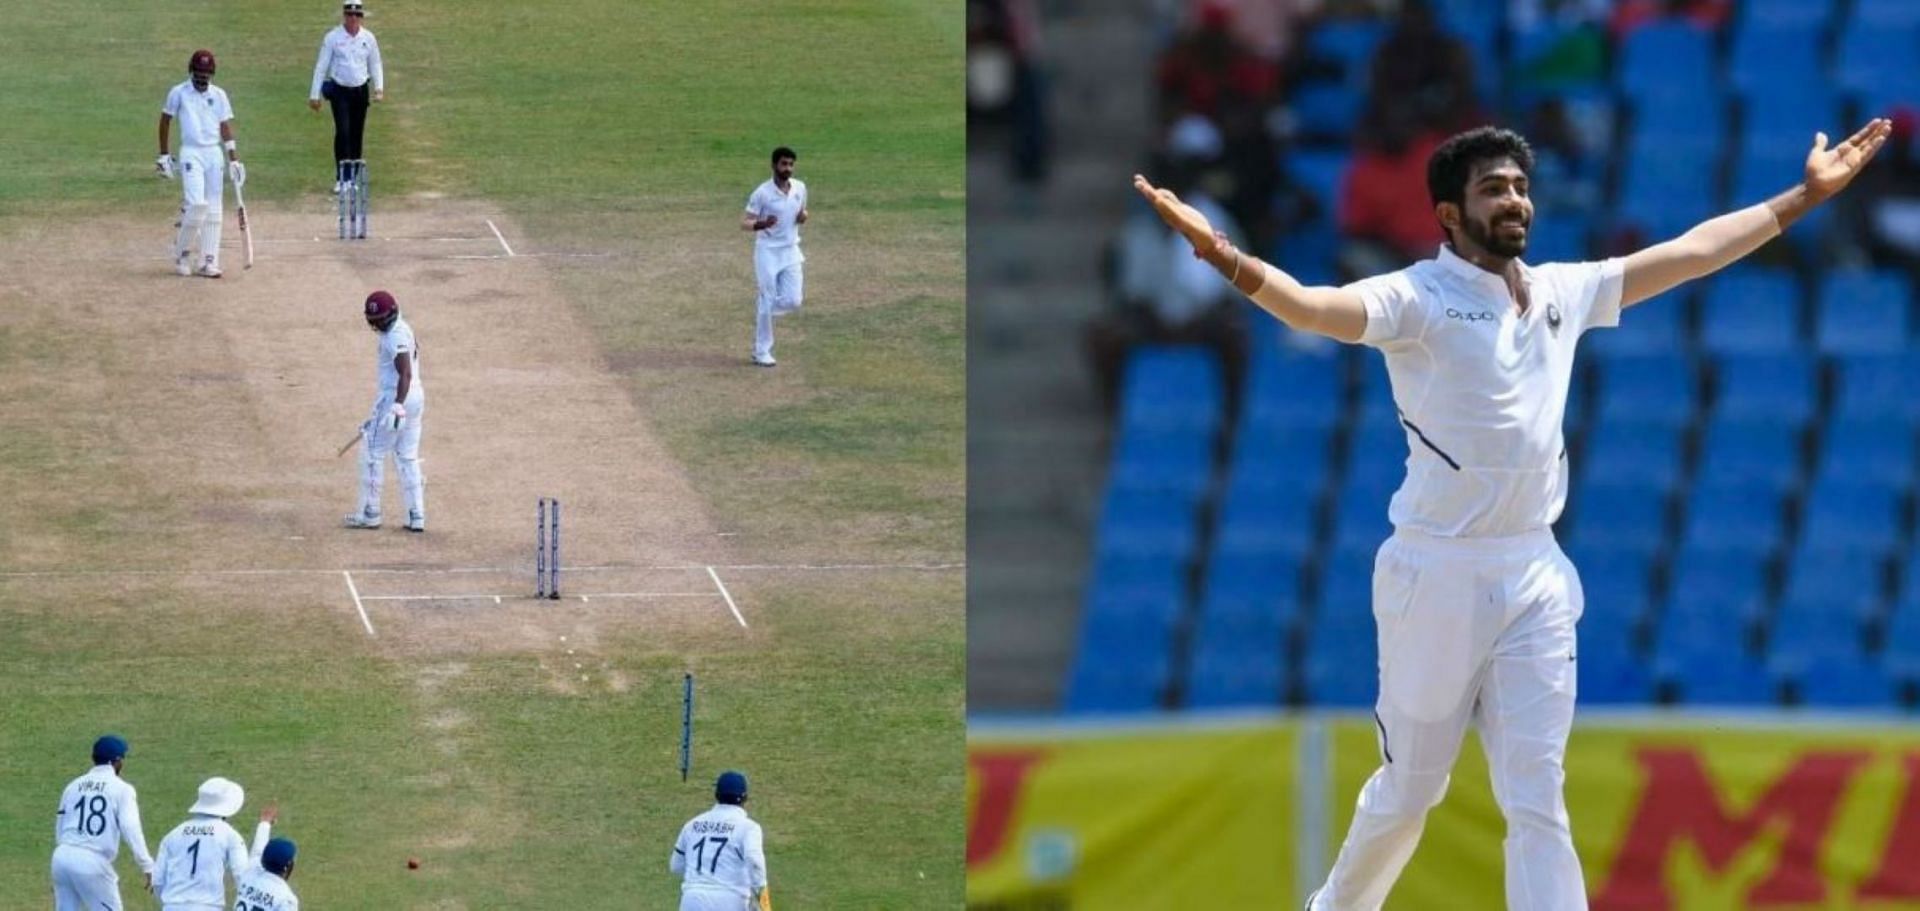 Bumrah was at his masterful in the opening Test as well.